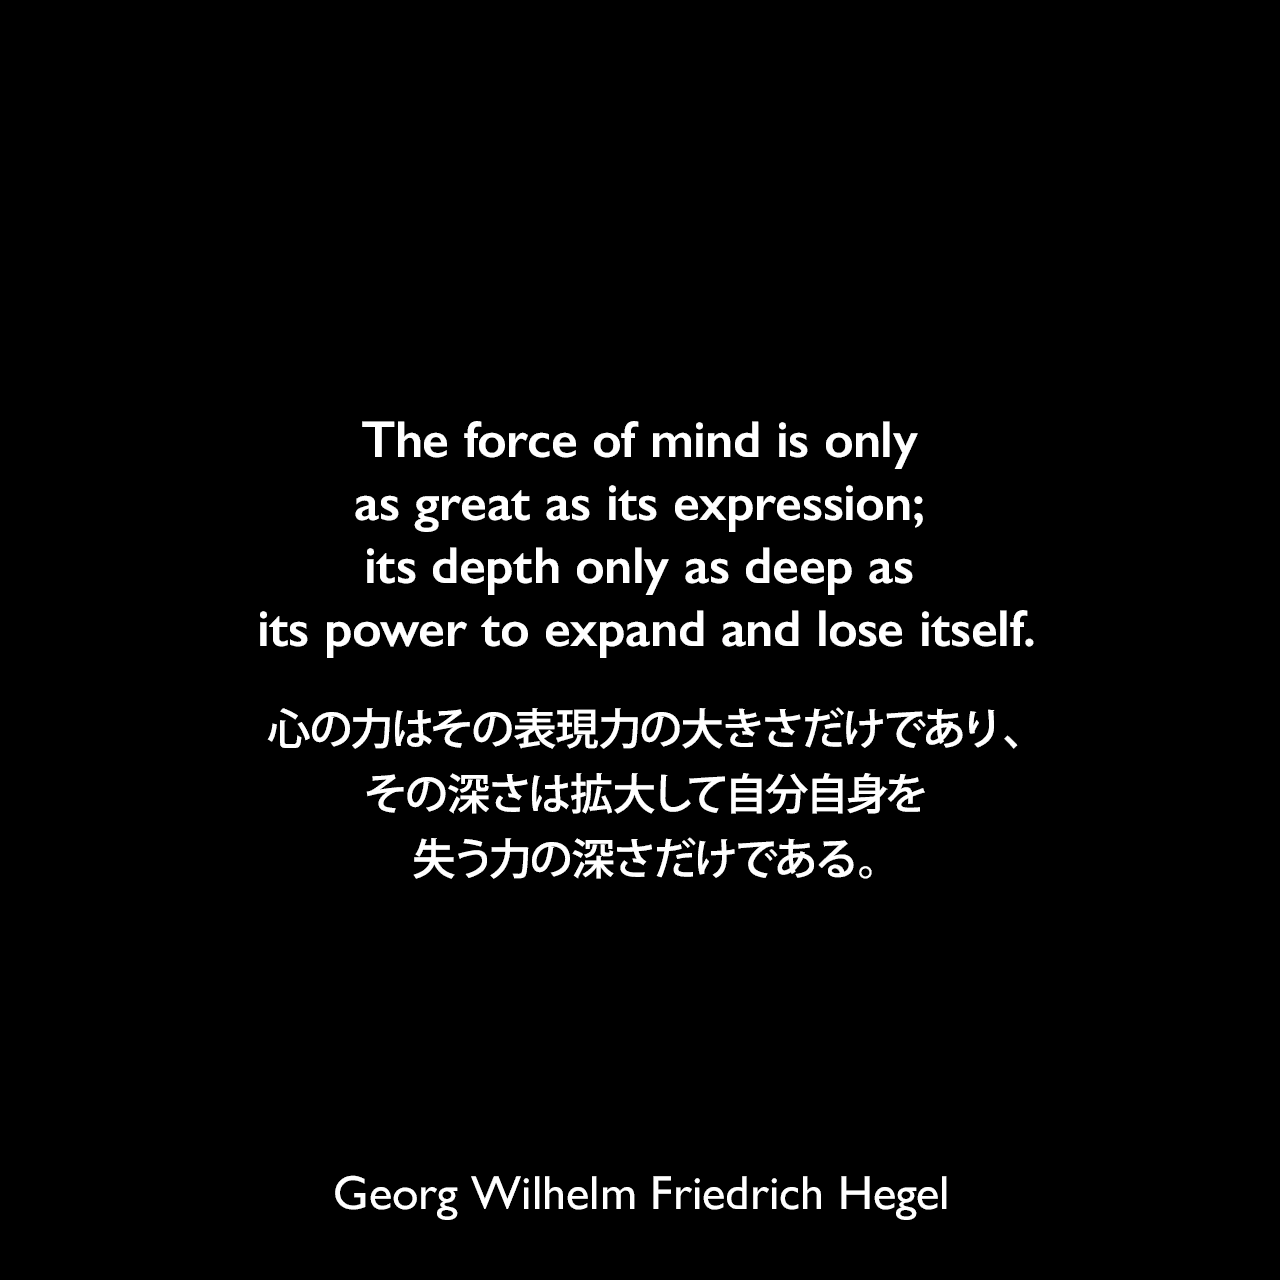 The force of mind is only as great as its expression; its depth only as deep as its power to expand and lose itself.心の力はその表現力の大きさだけであり、その深さは拡大して自分自身を失う力の深さだけである。- ヘーゲルによる本「精神現象学」よりGeorg Wilhelm Friedrich Hegel